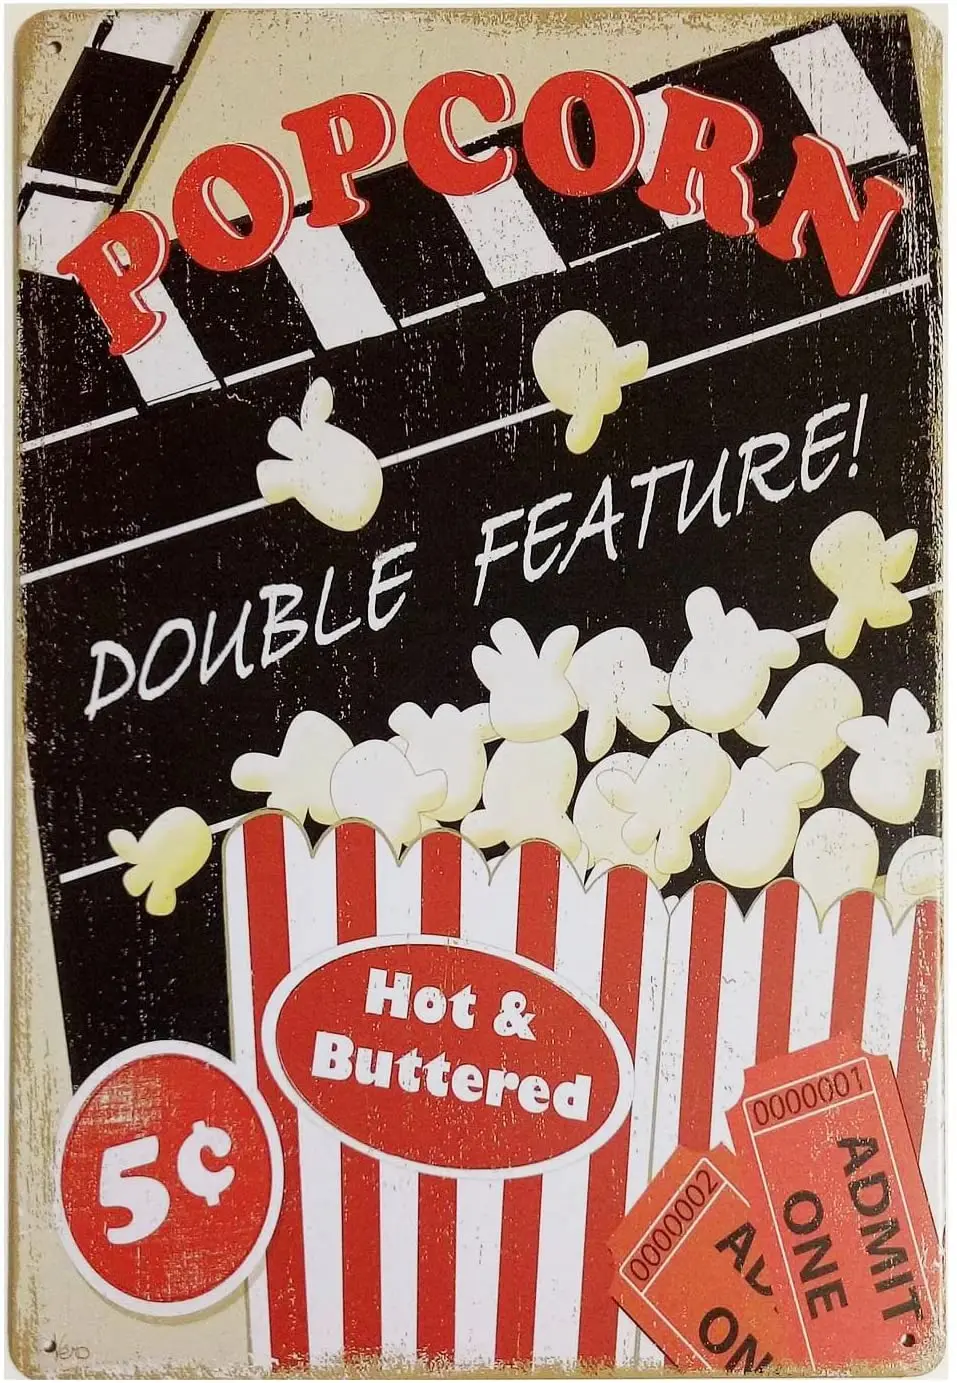 

ERLOOD Popcorn Double Feature Hot&Buttered Retro Vintage Decor Metal Tin Sign 12 X8 Inches